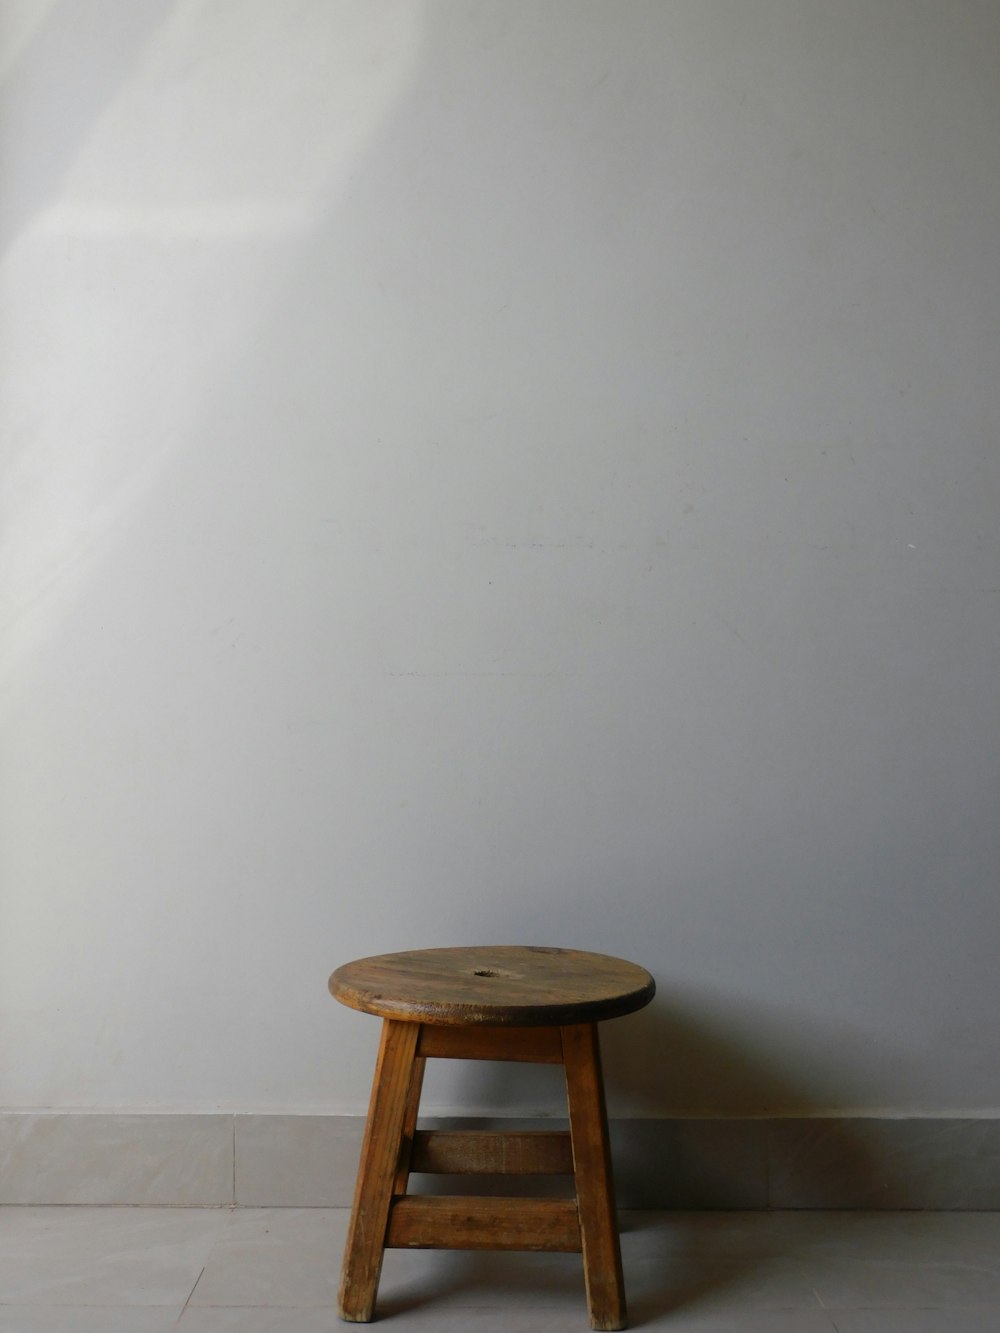 a small wooden stool against a white wall